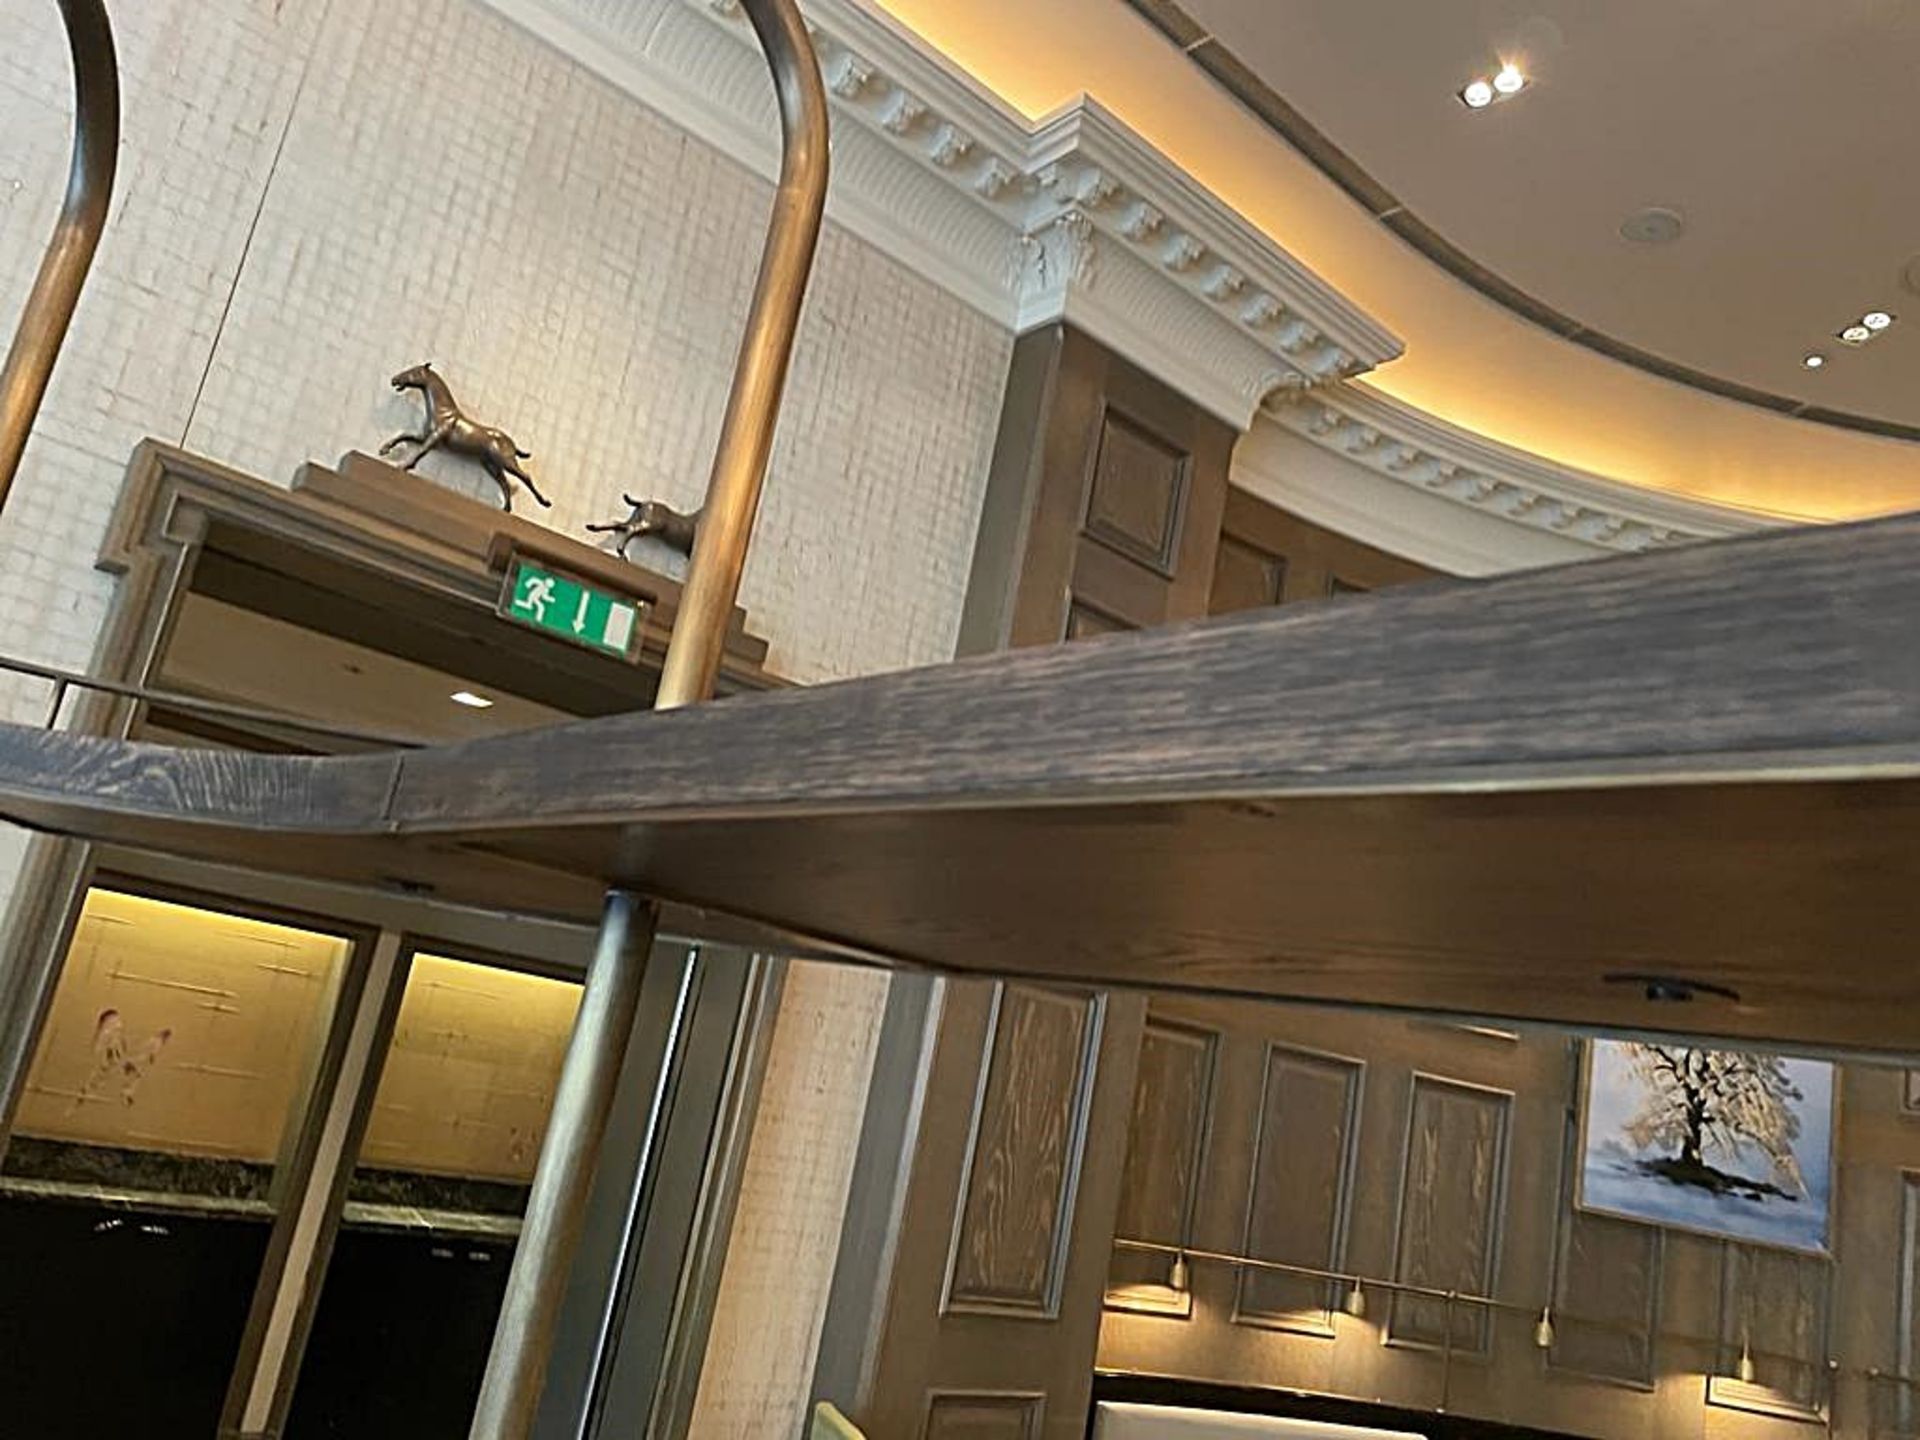 1 x Luxury Curved Restaurant 5.5-Metre Centrepiece Bar, Clad in Timber & Leather with 18 x Stools - Image 20 of 72